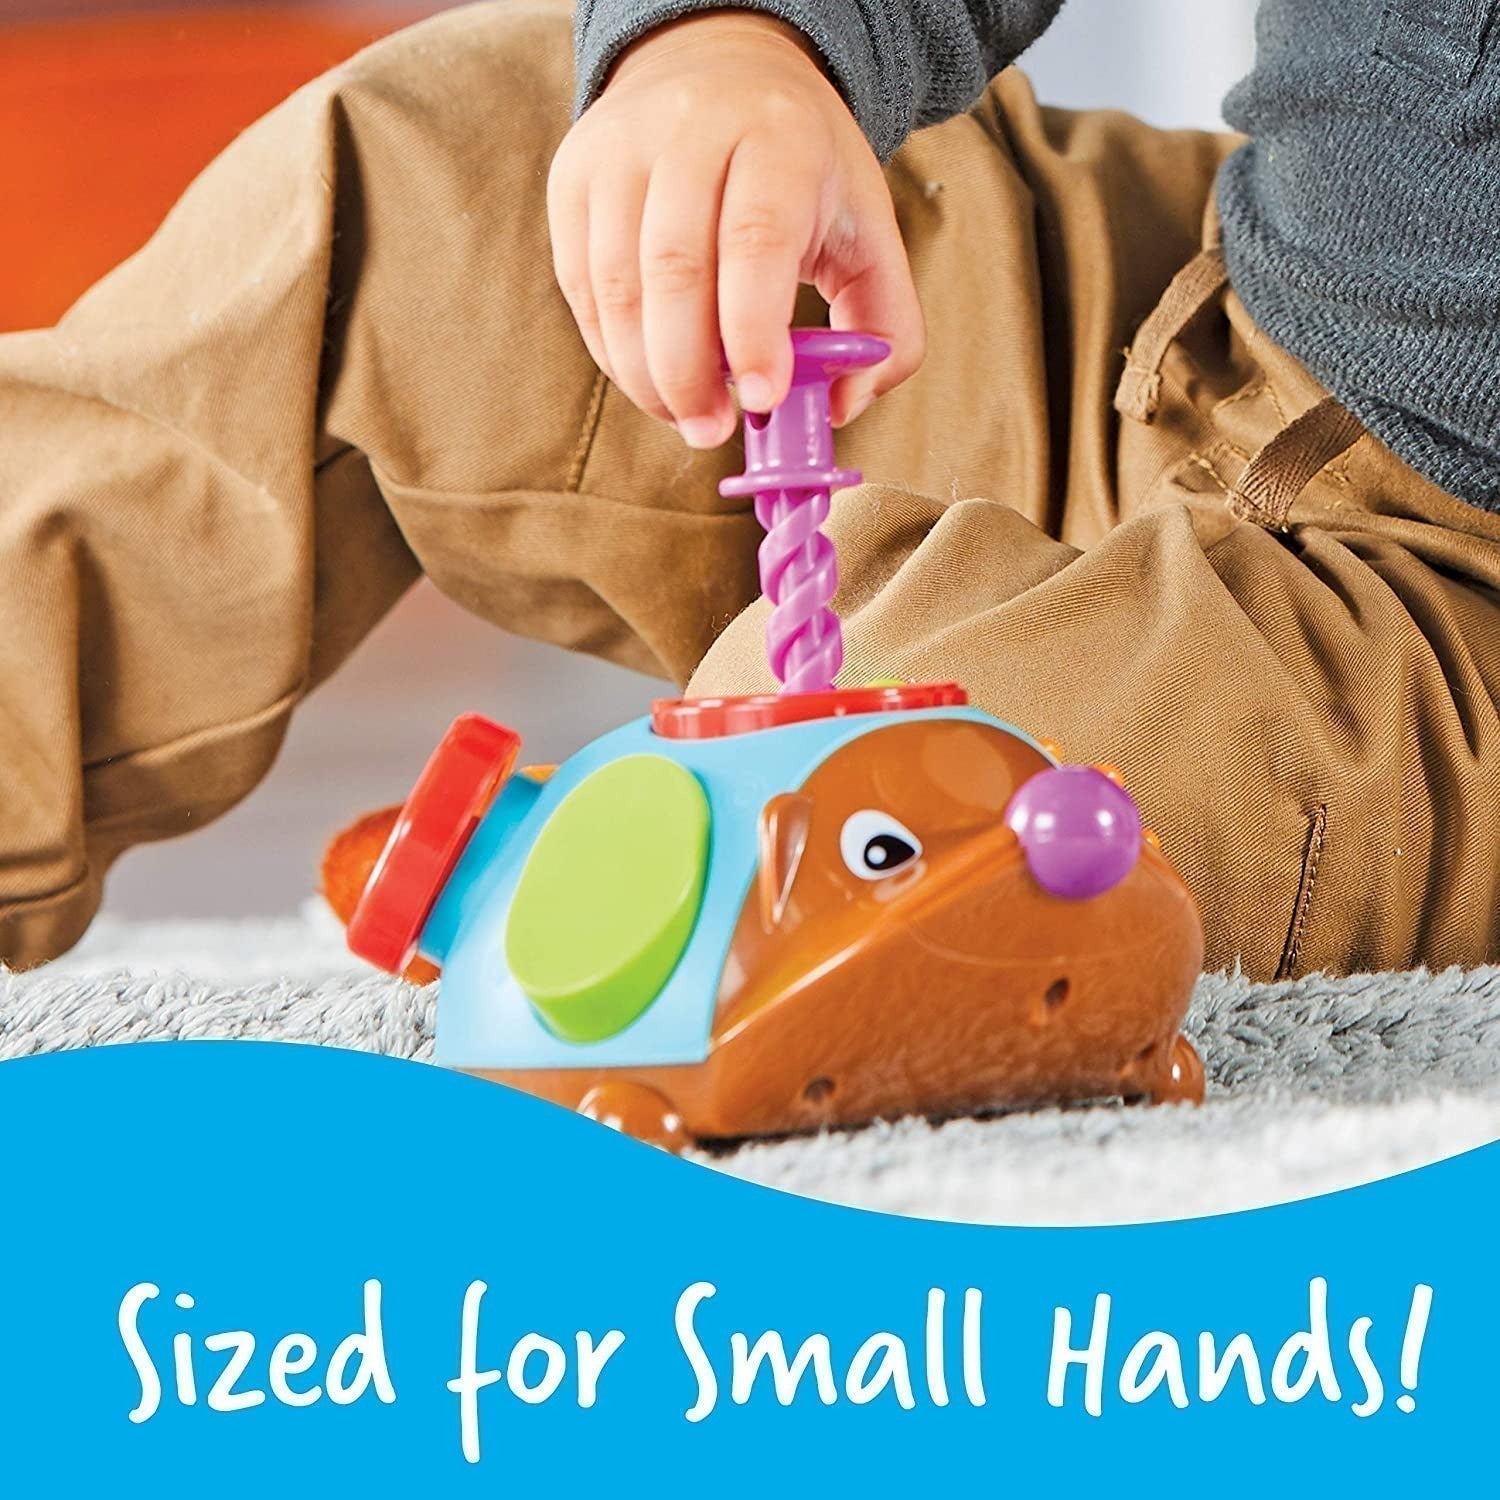 Spike the Fine Motor Hedgehog Fidget Friend, There are 6 ways to fidget and play with Spike the Fine Motor Hedgehog® Fidget Friend. Each time your child spins the wheel, turns the crank, presses the button, twists the knob, pushes the plunger, and moves the switch, they’re learning essential fine motor skills through tactile and fun fidget play. Young children will build new preschool sensory skills every time they fidget with the Spike the Fine Motor Hedgehog Fidget Friend. Inspired by our bestselling Spik